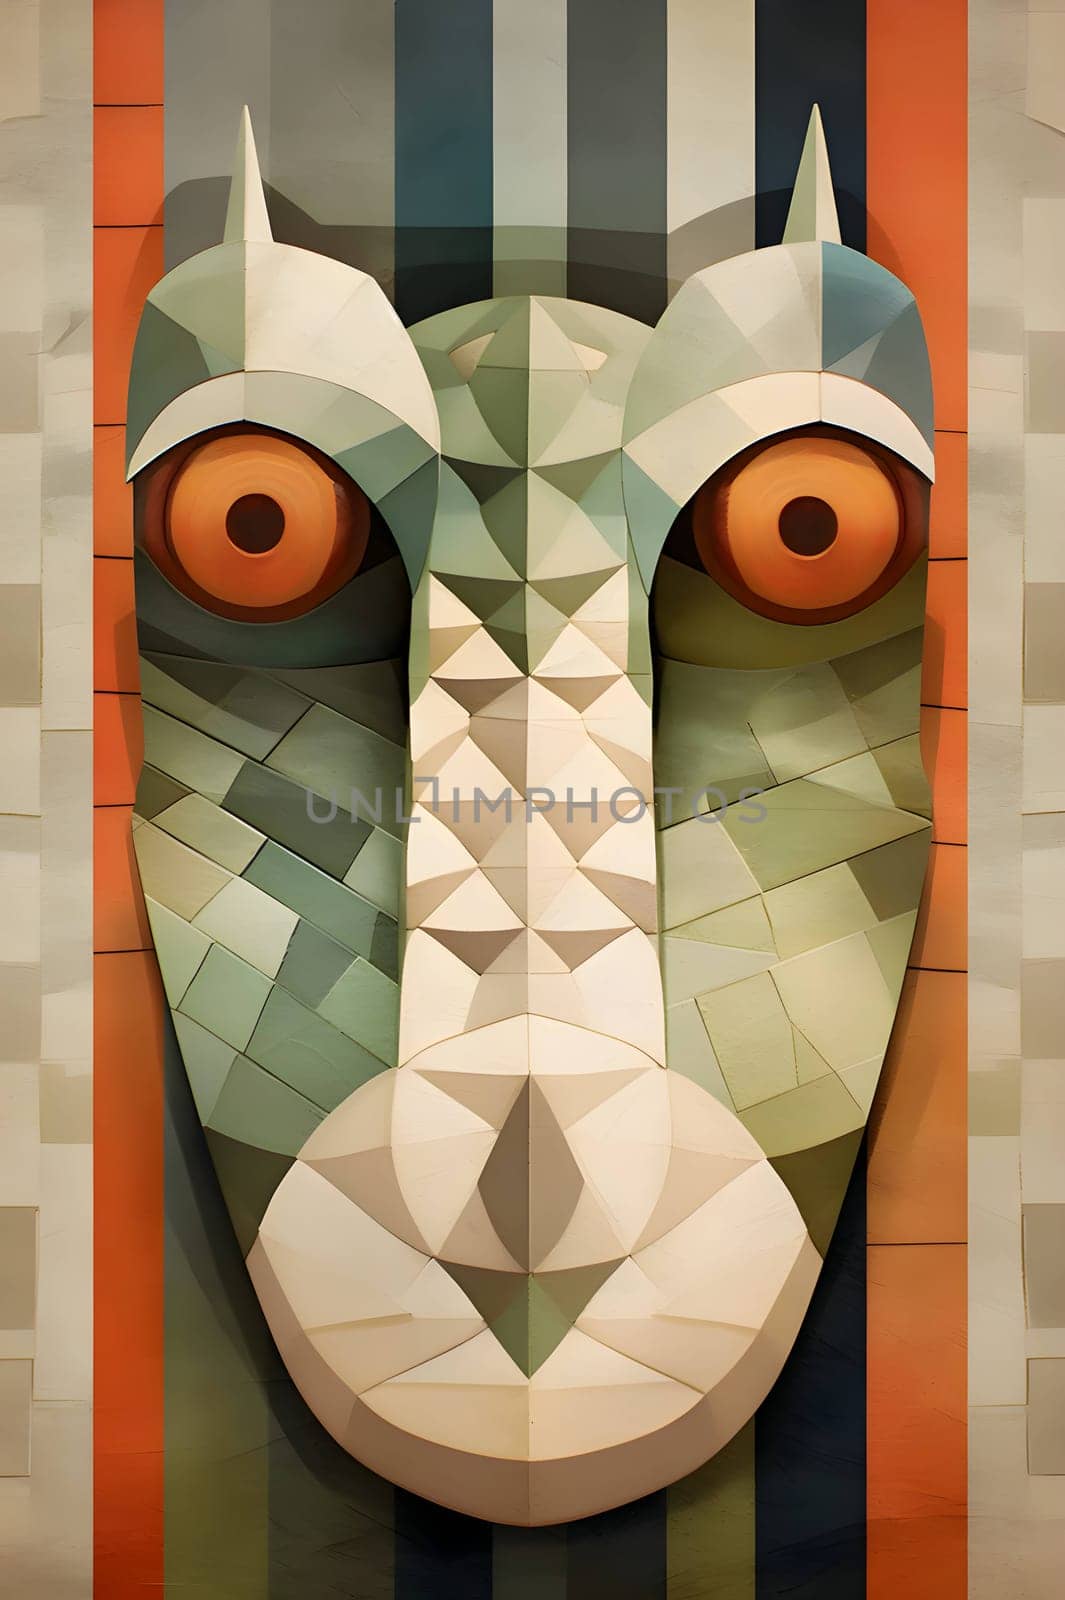 Abstract illustration: Illustration of a crocodile head on a colorful geometric background.